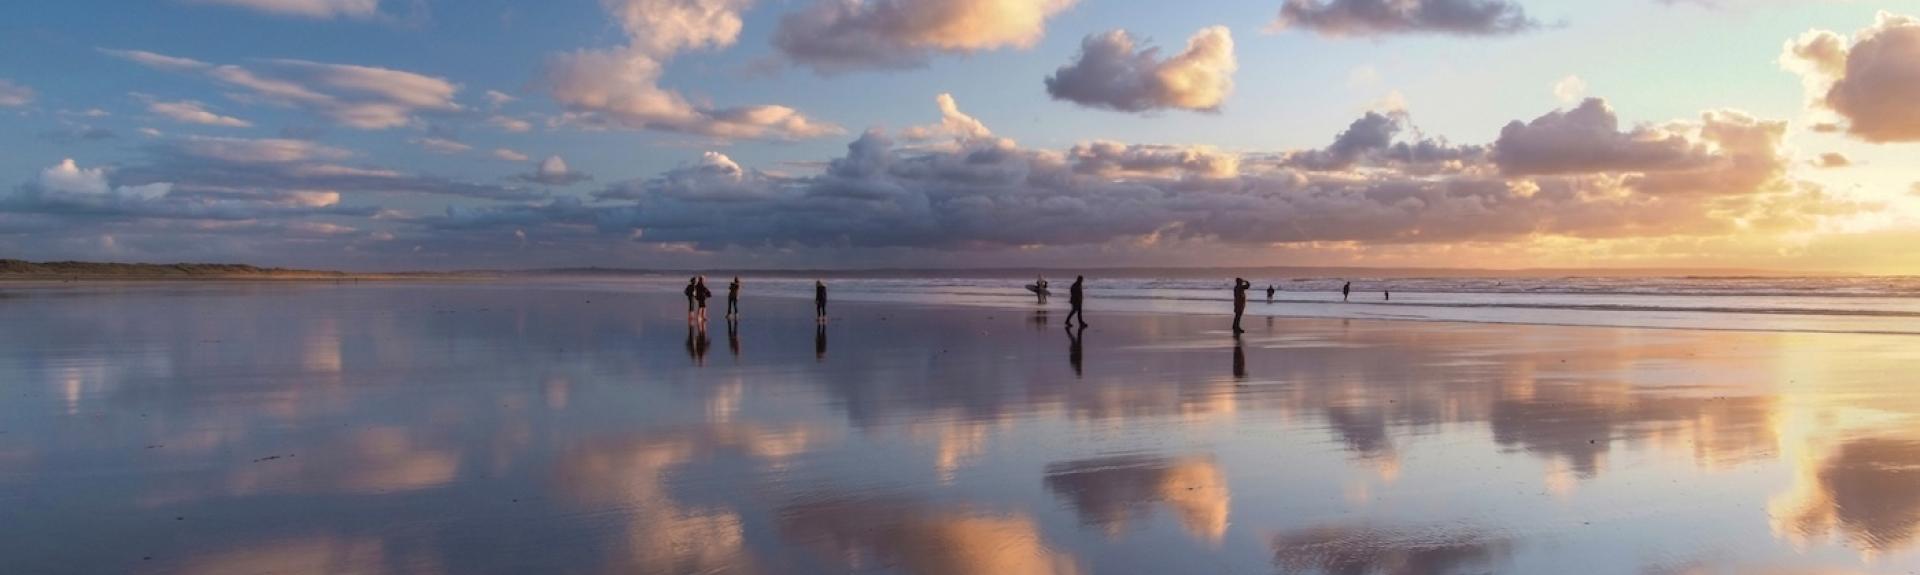 Small clouds are reflected in the wet surface of a sandy beach in North Devon.